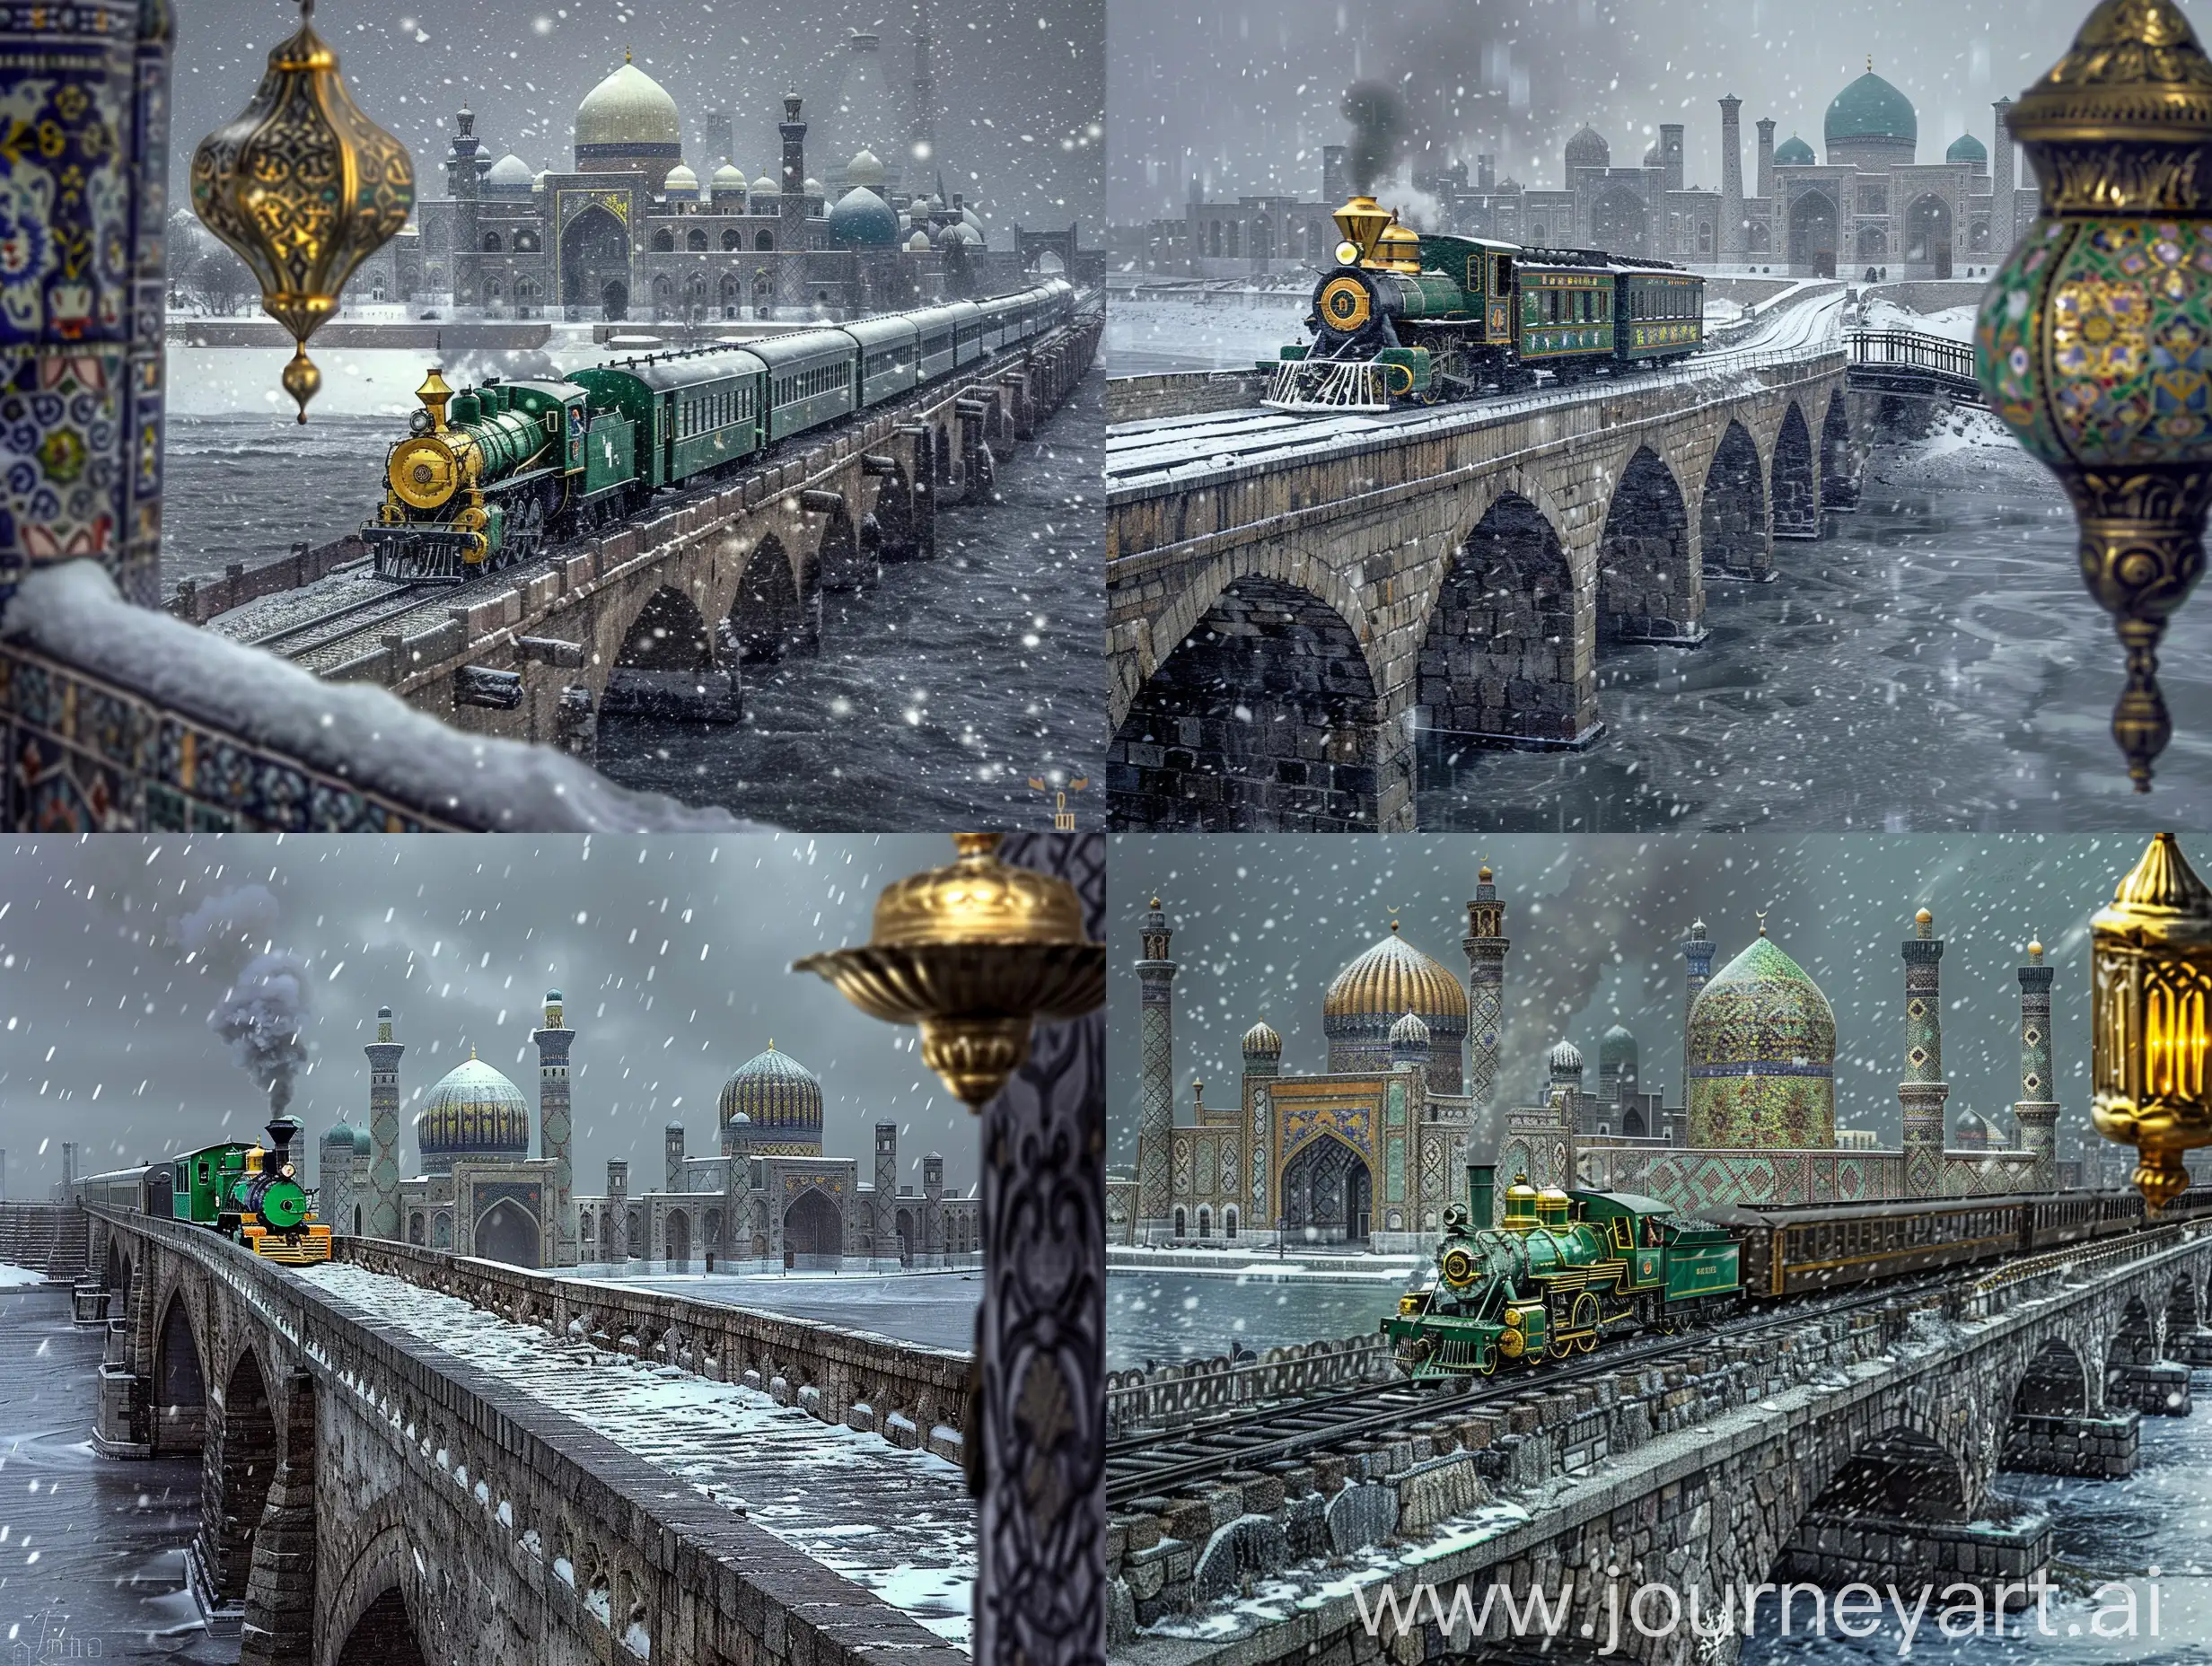 Dramatic-Snowfall-in-a-Persian-Tiled-Seafront-City-with-a-Moving-Steam-Engine-Train